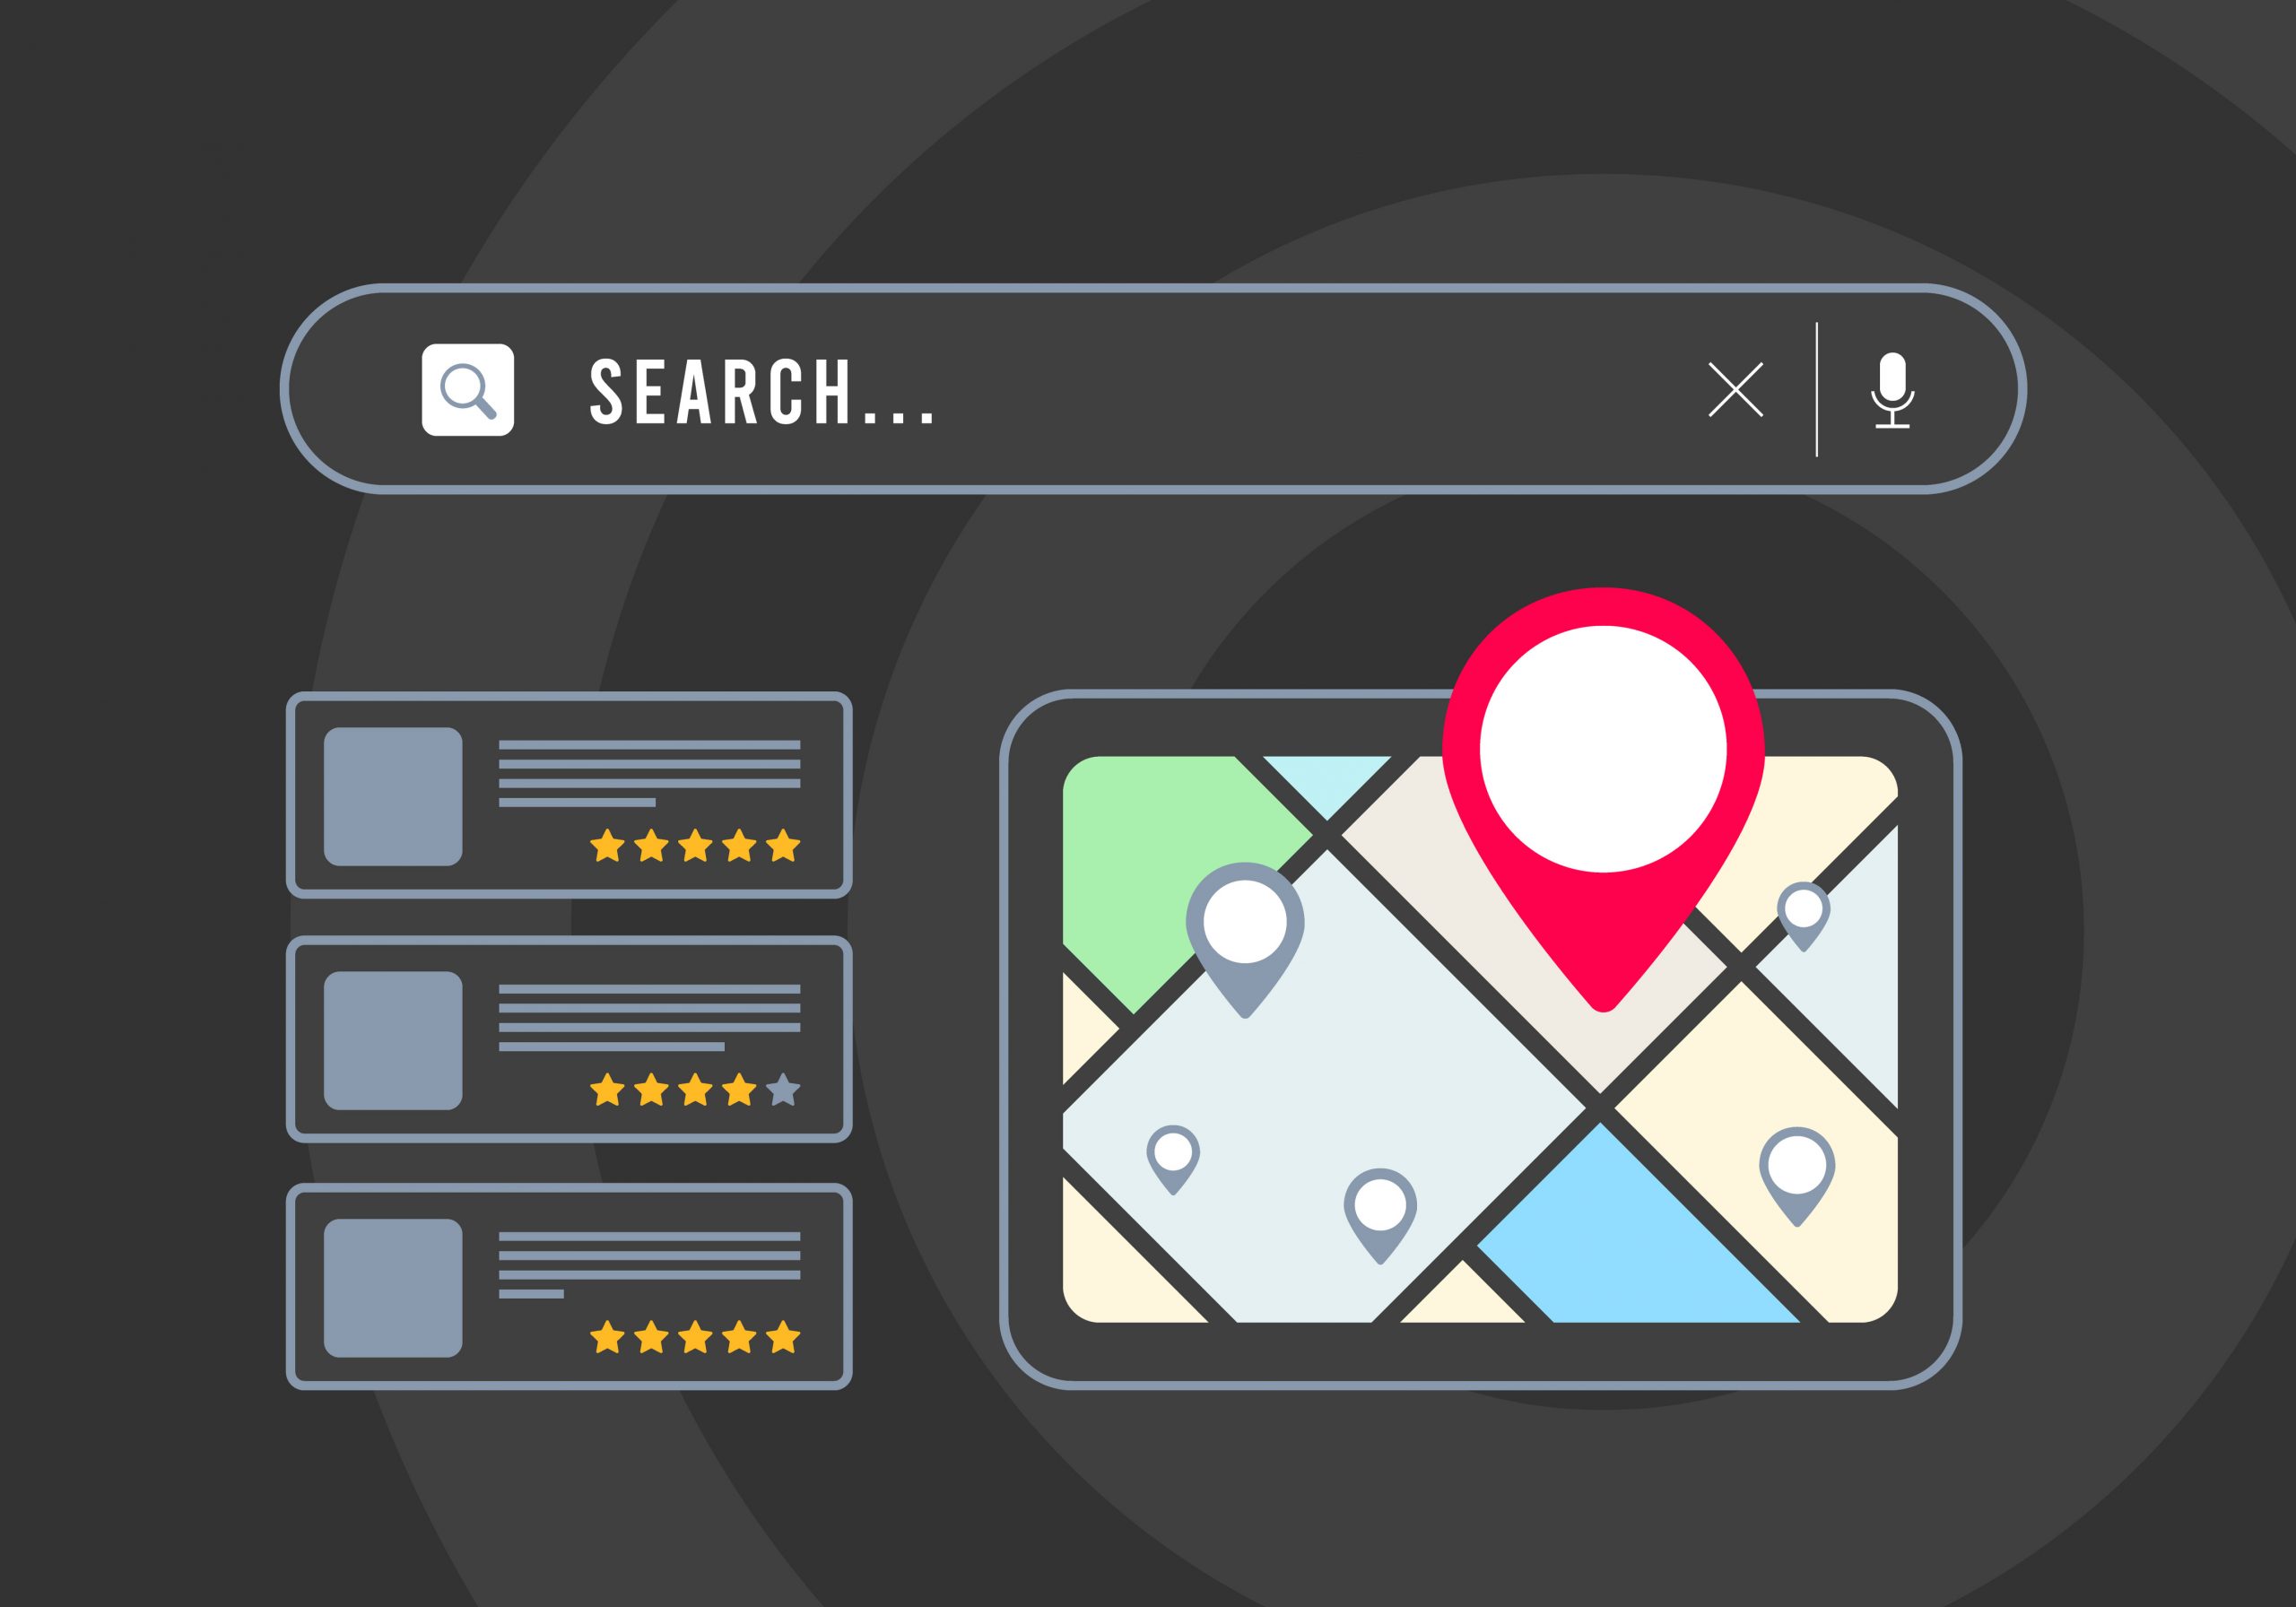 Search Results page with business listings and map